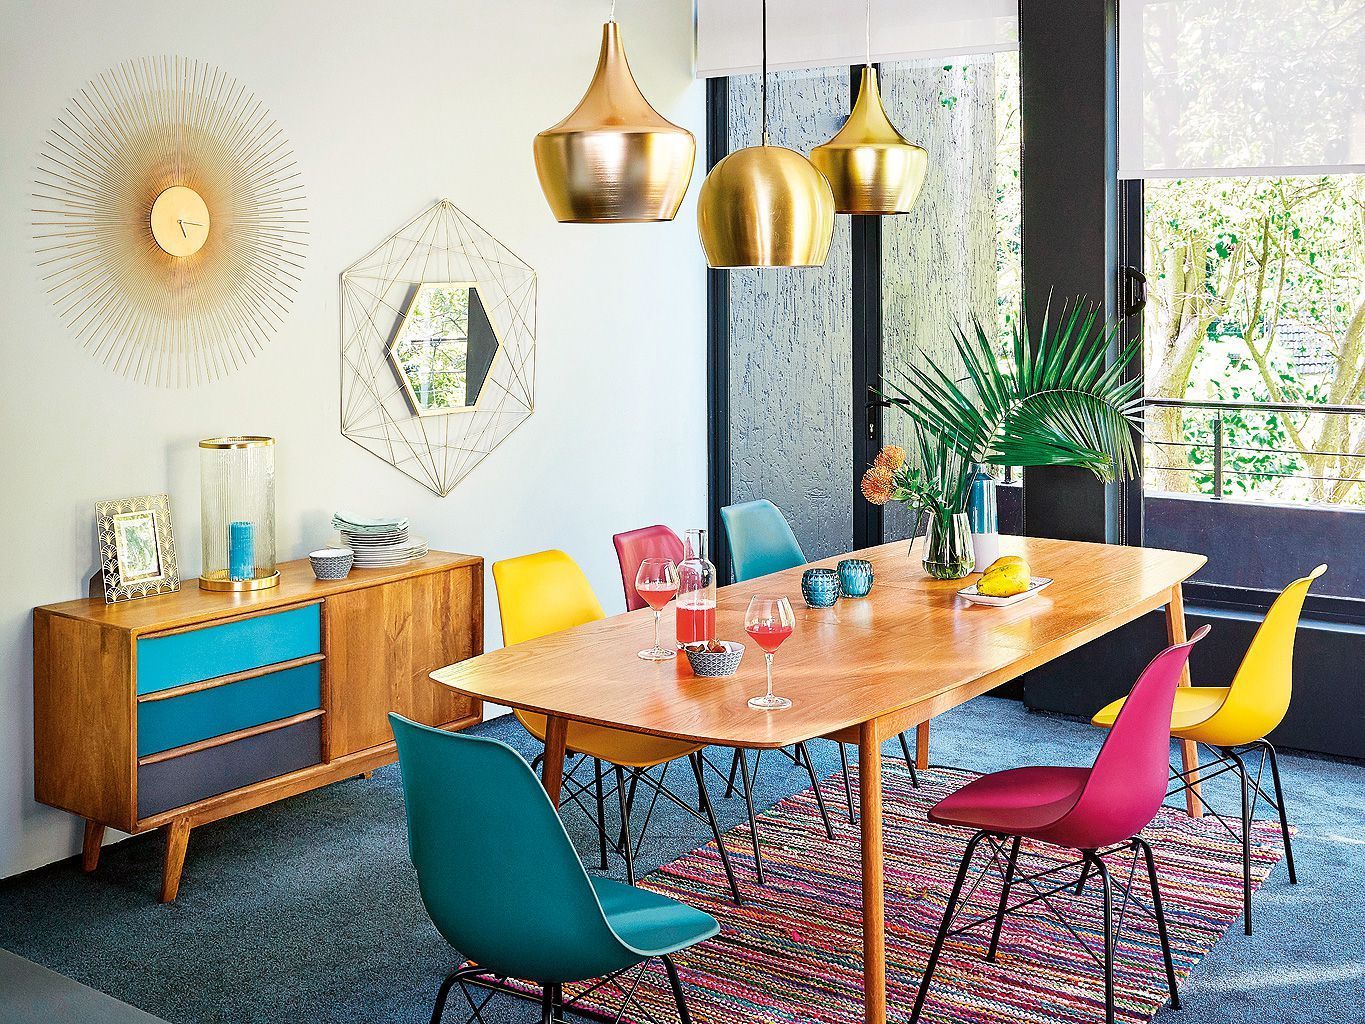 A bright mid century modenr dining space done with various shades of red, ble and metallics for a shiny touch